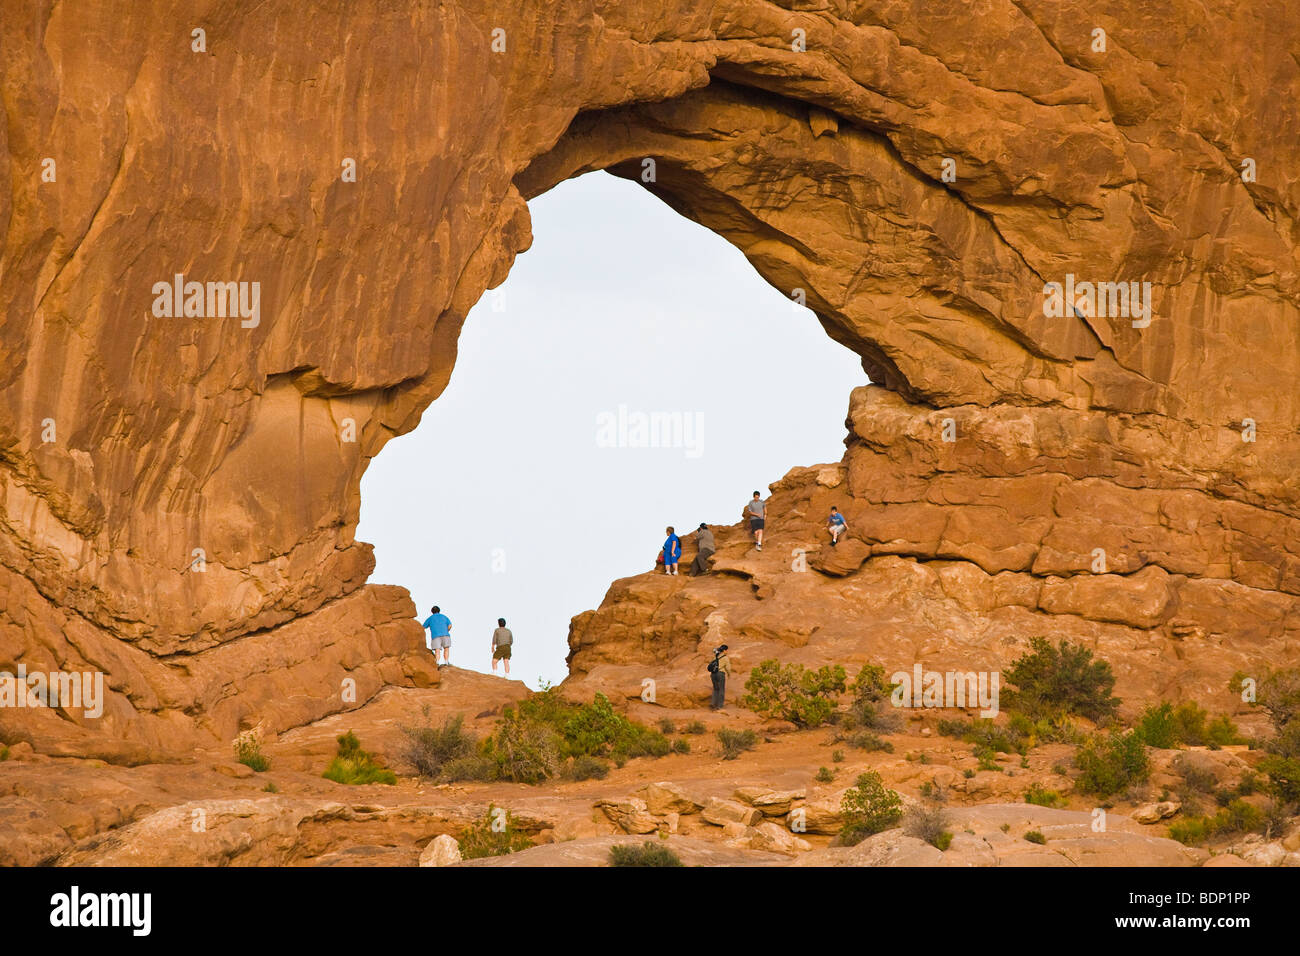 North Window Arch in The Windows section of Arches National Park, Moab, Utah, United States Stock Photo